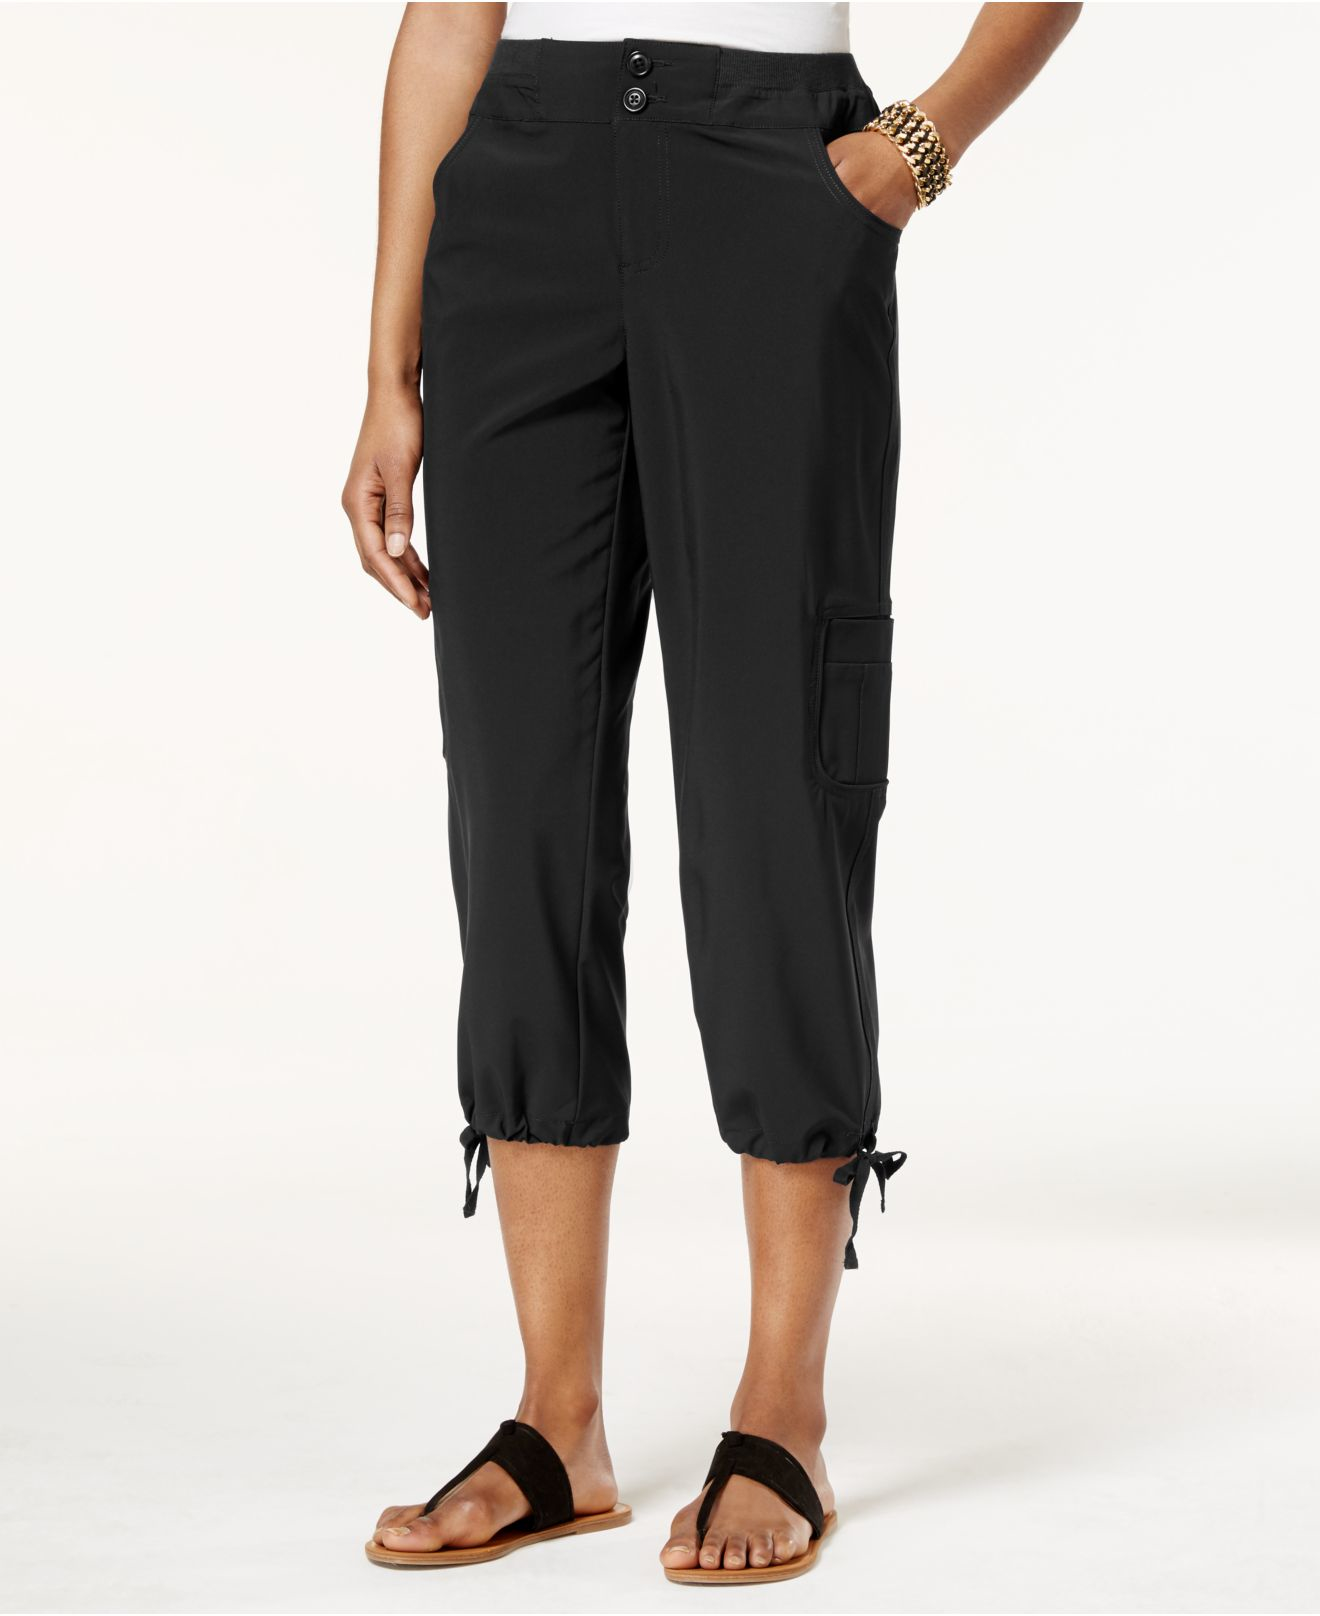 Lyst - Style & Co. Cargo Capri Pants, Only At Macy's in Black